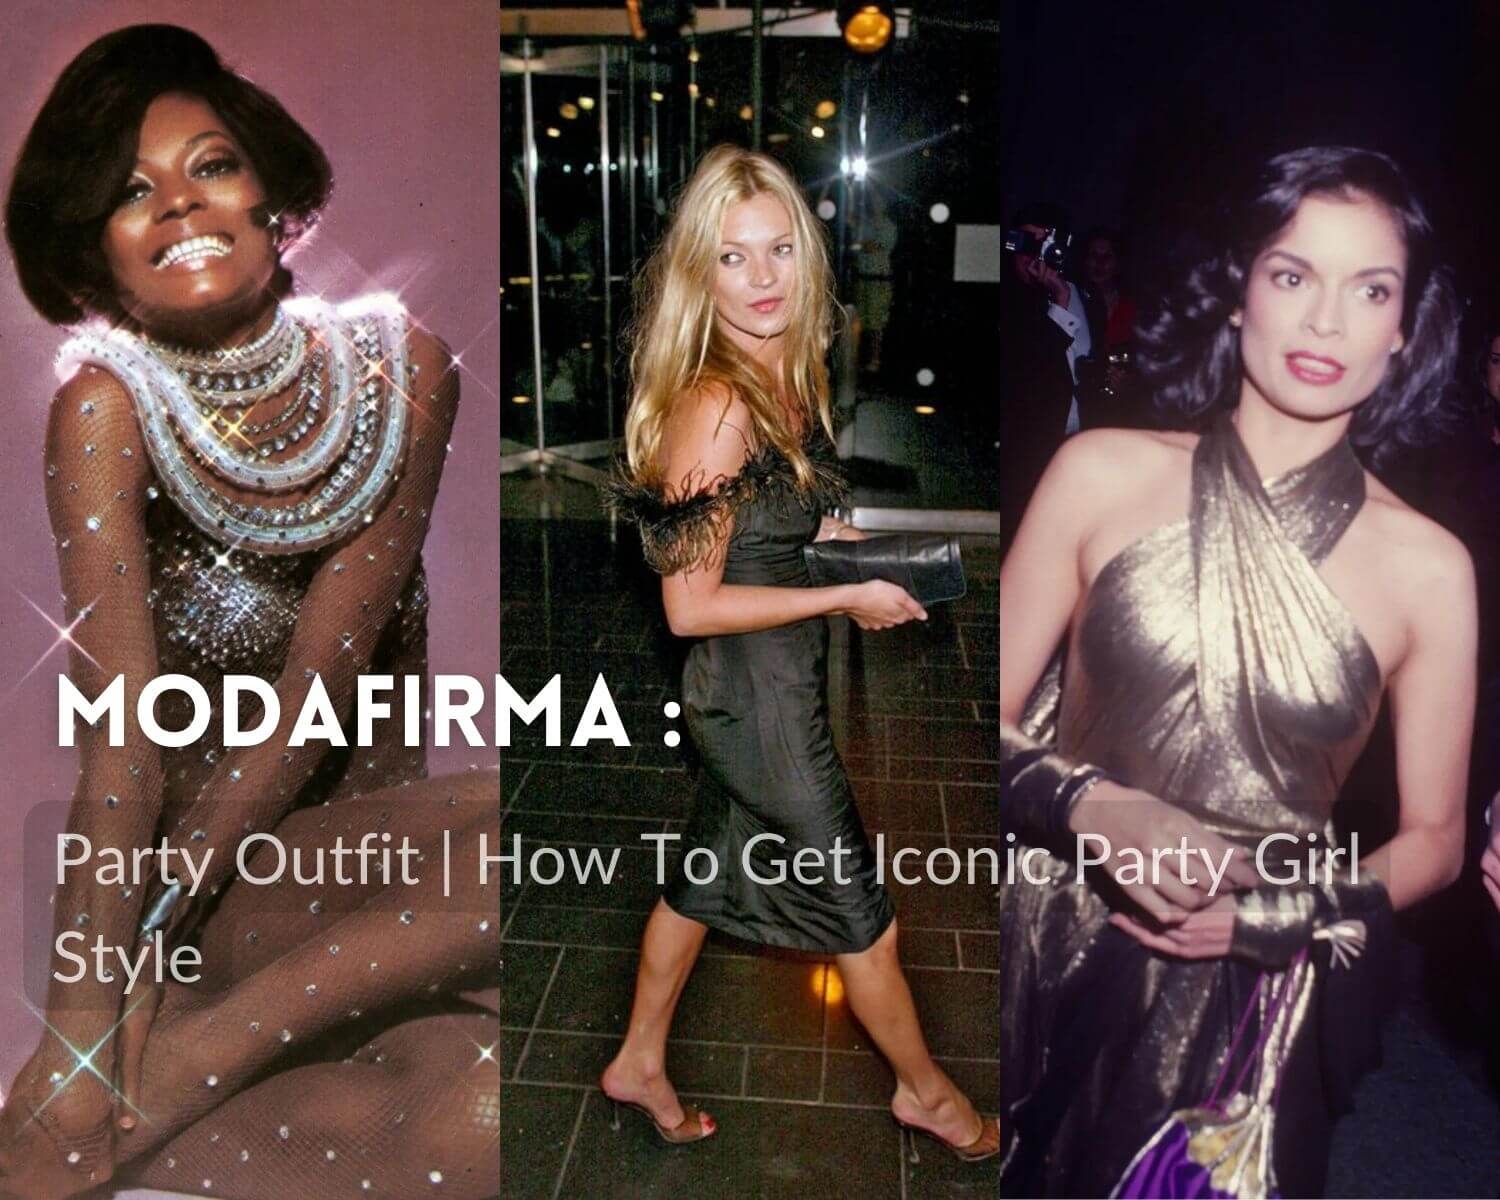 Party Outfit | How To Get Iconic Party Girl Style